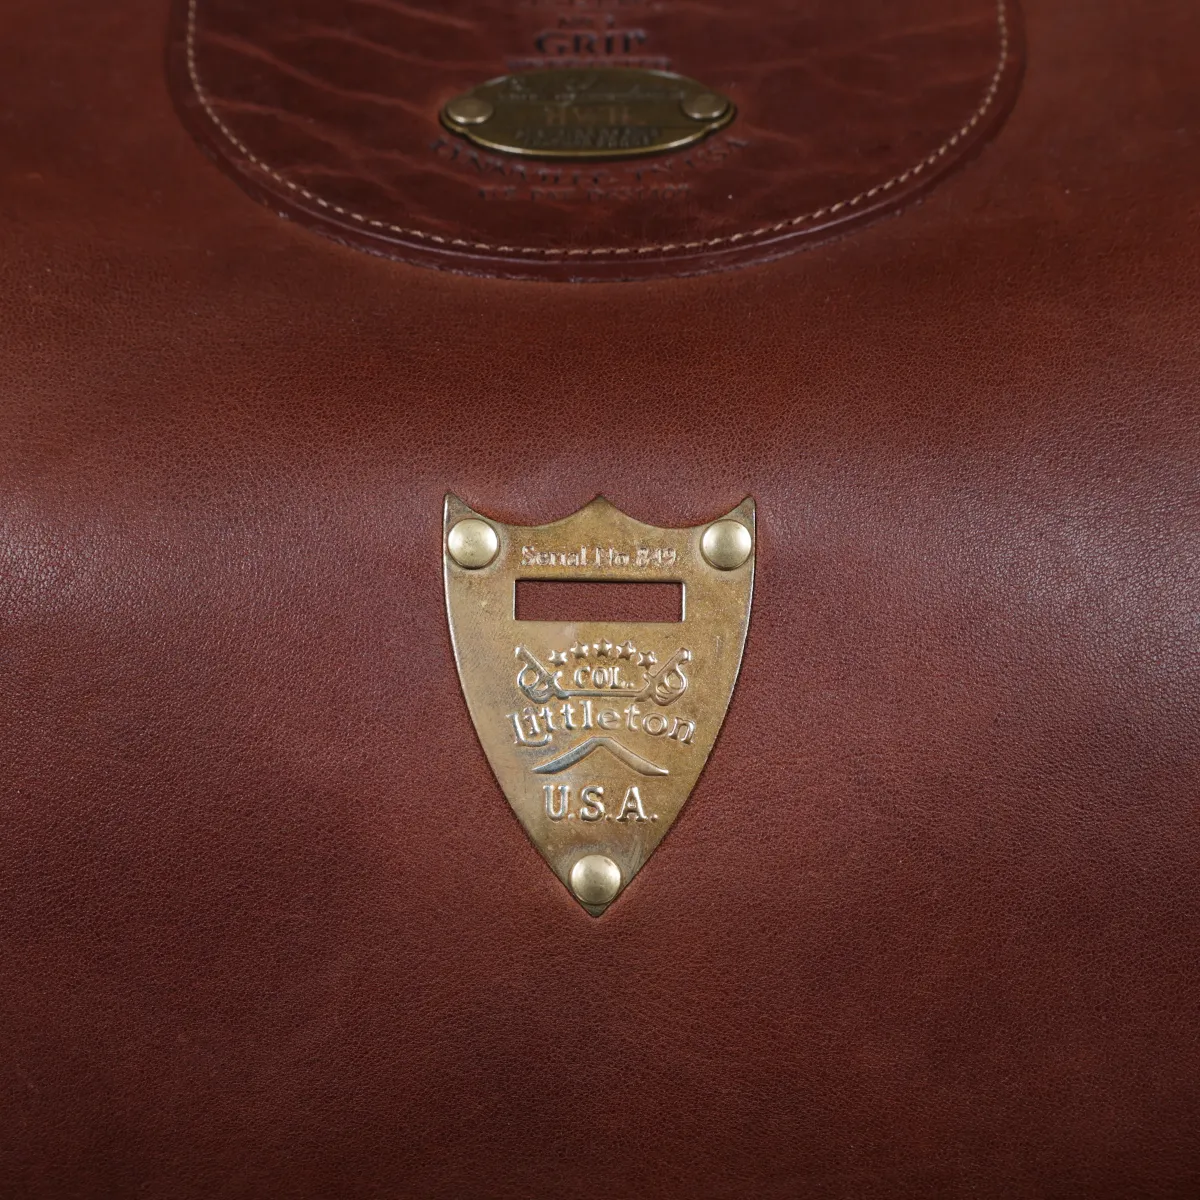 Vintage-style dark brown No. 3 Grip Bag on wooden table with a dark background - view of pommel shield